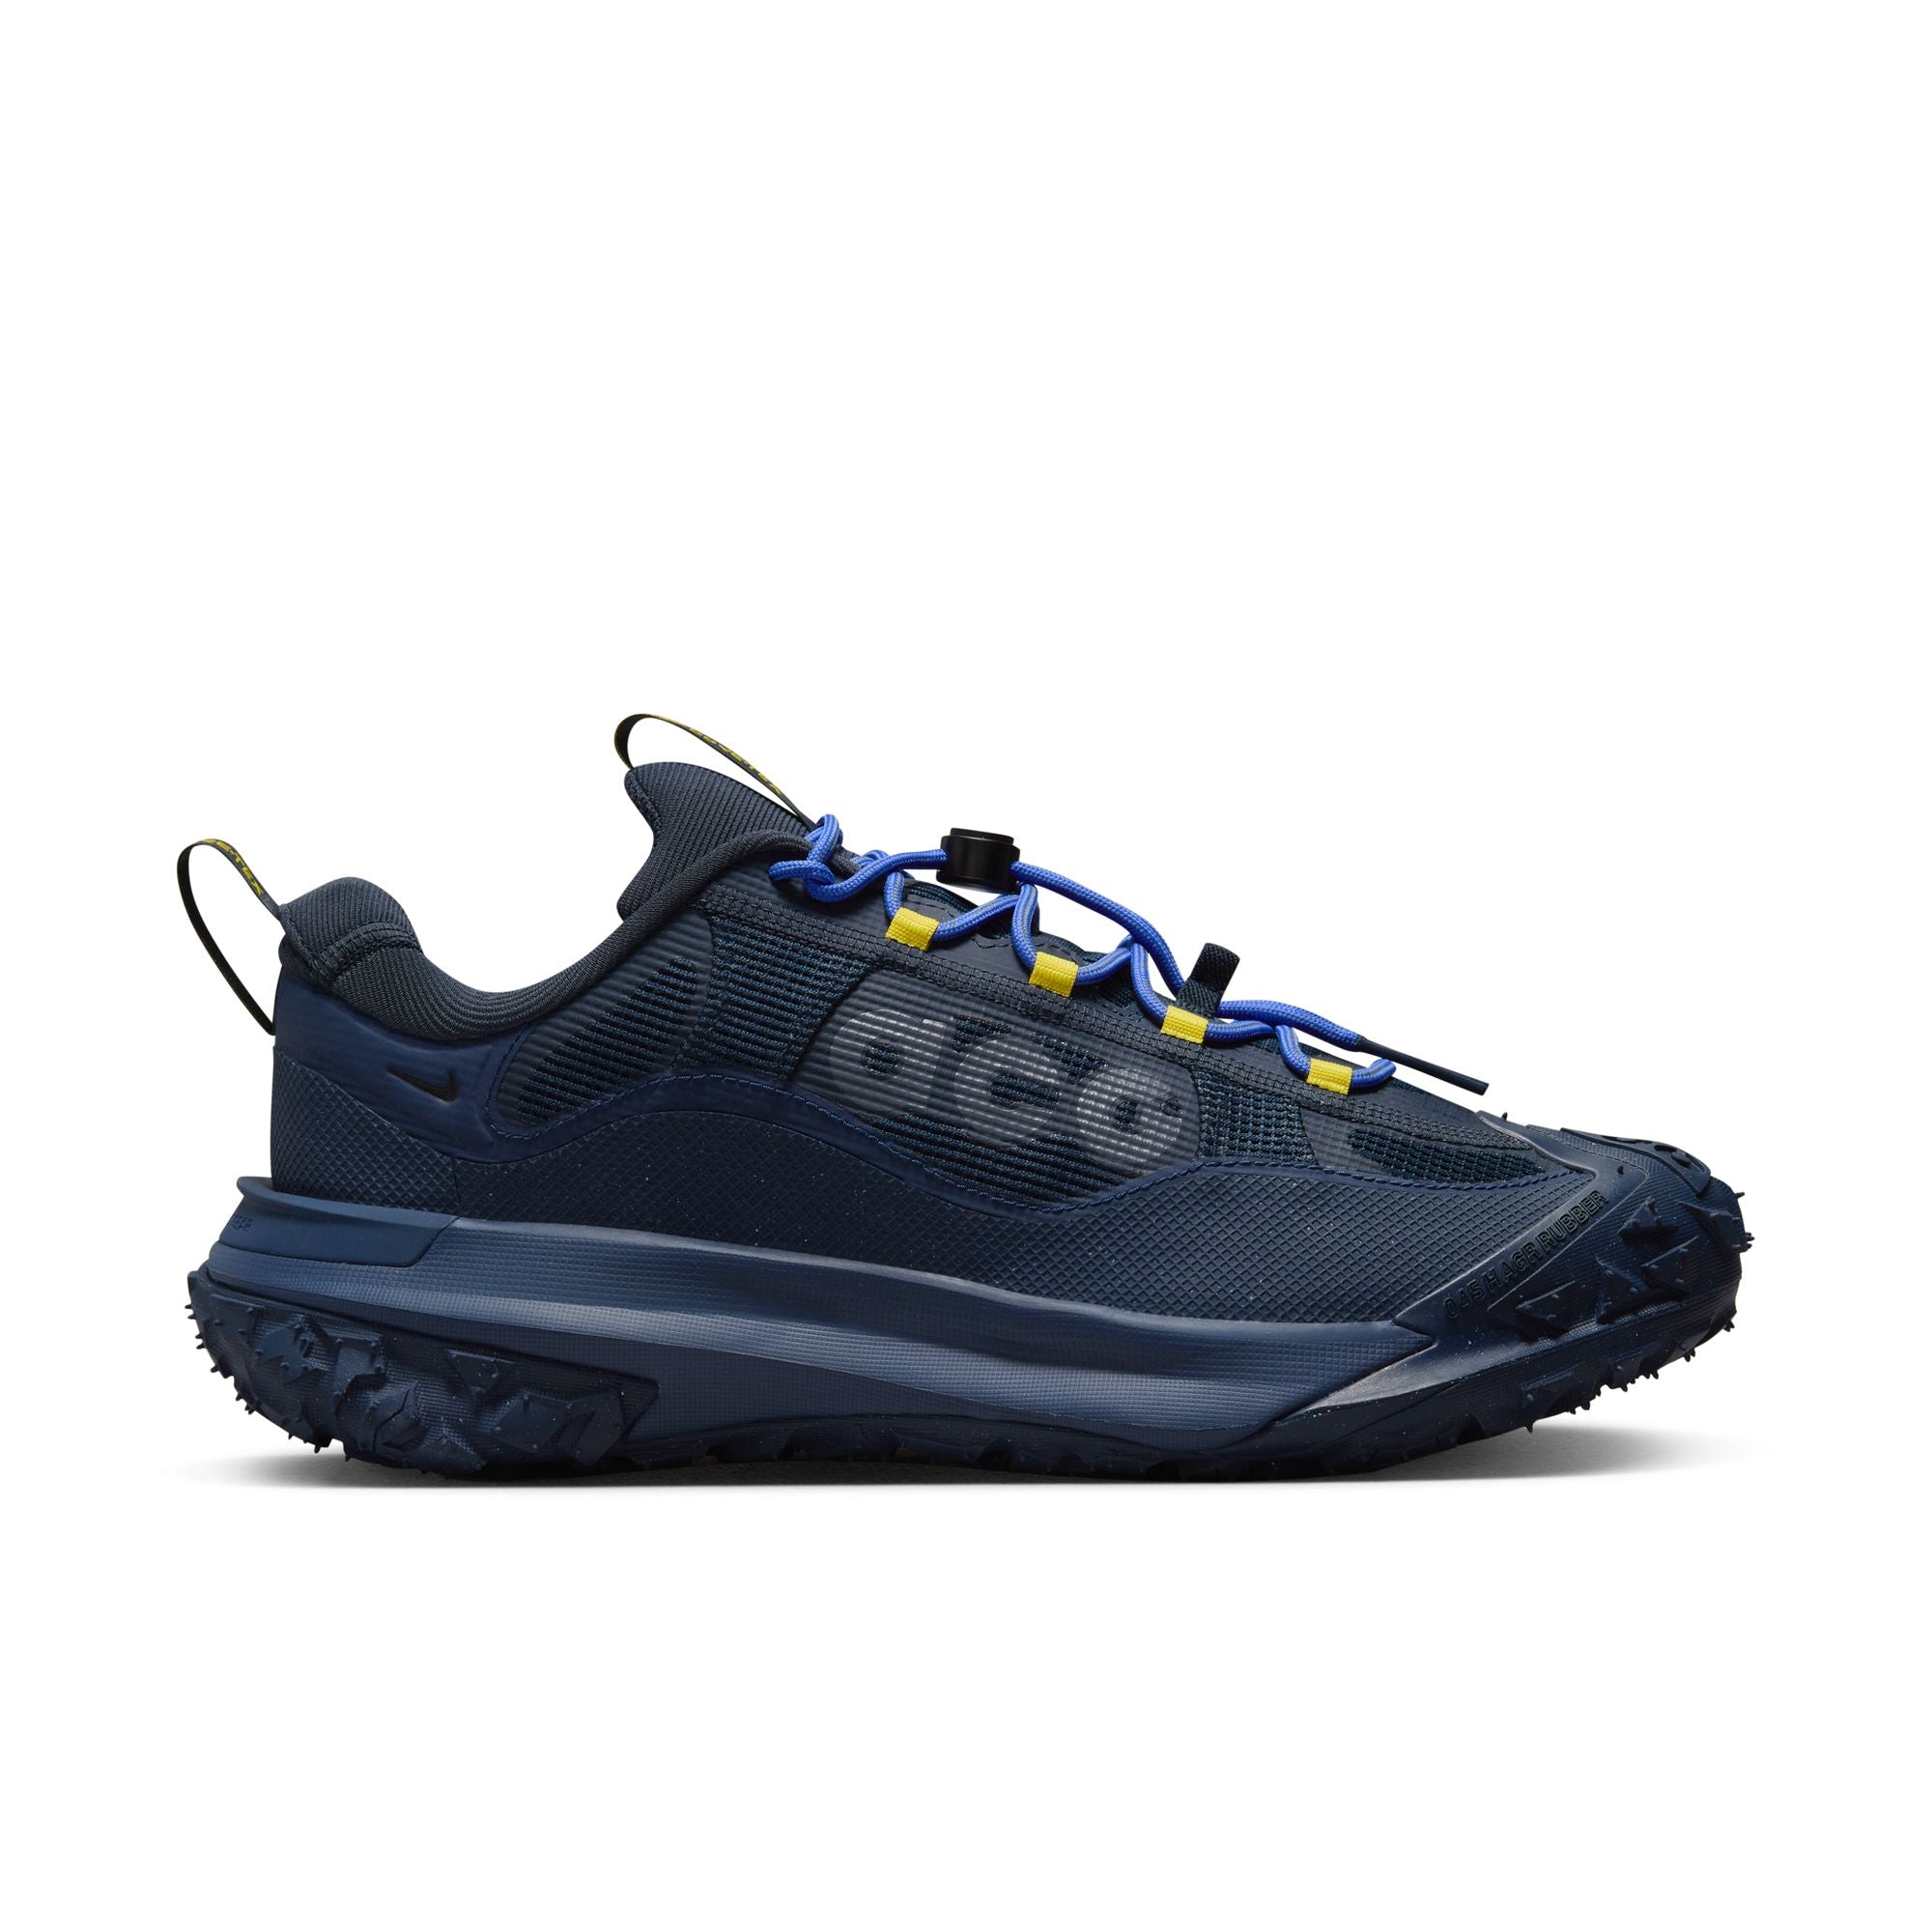 ACG Mountain Fly 2 Low GORE-TEX - INVINCIBLE